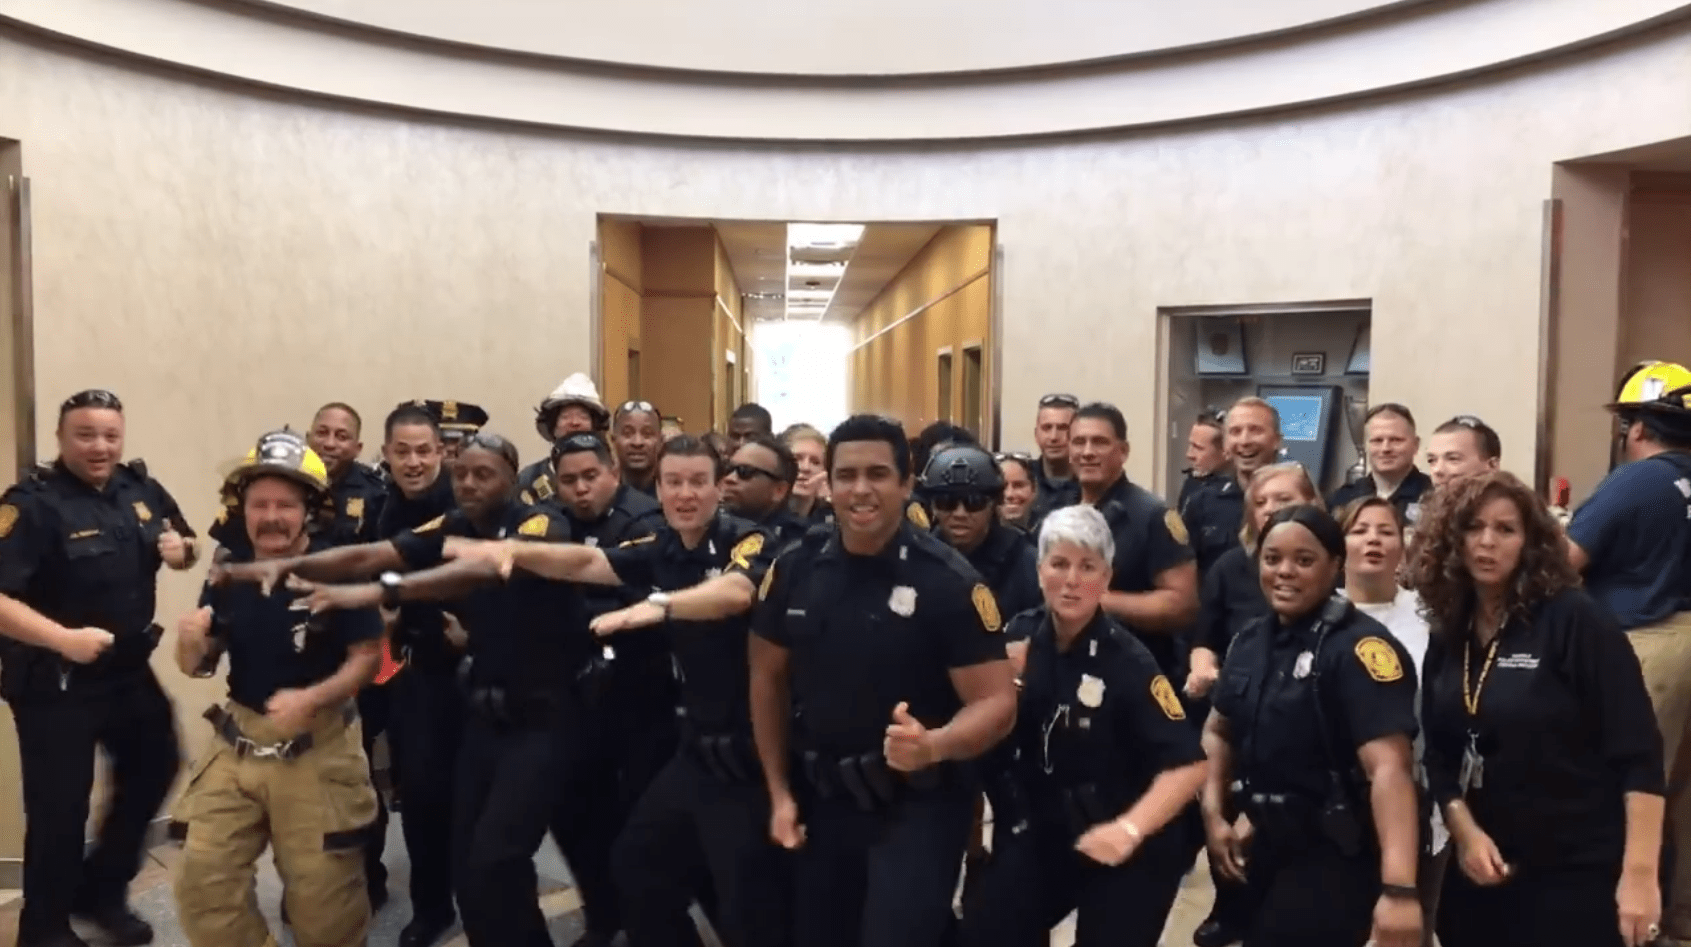 Norfolk Police Department Release Incredible Lip Sync Video